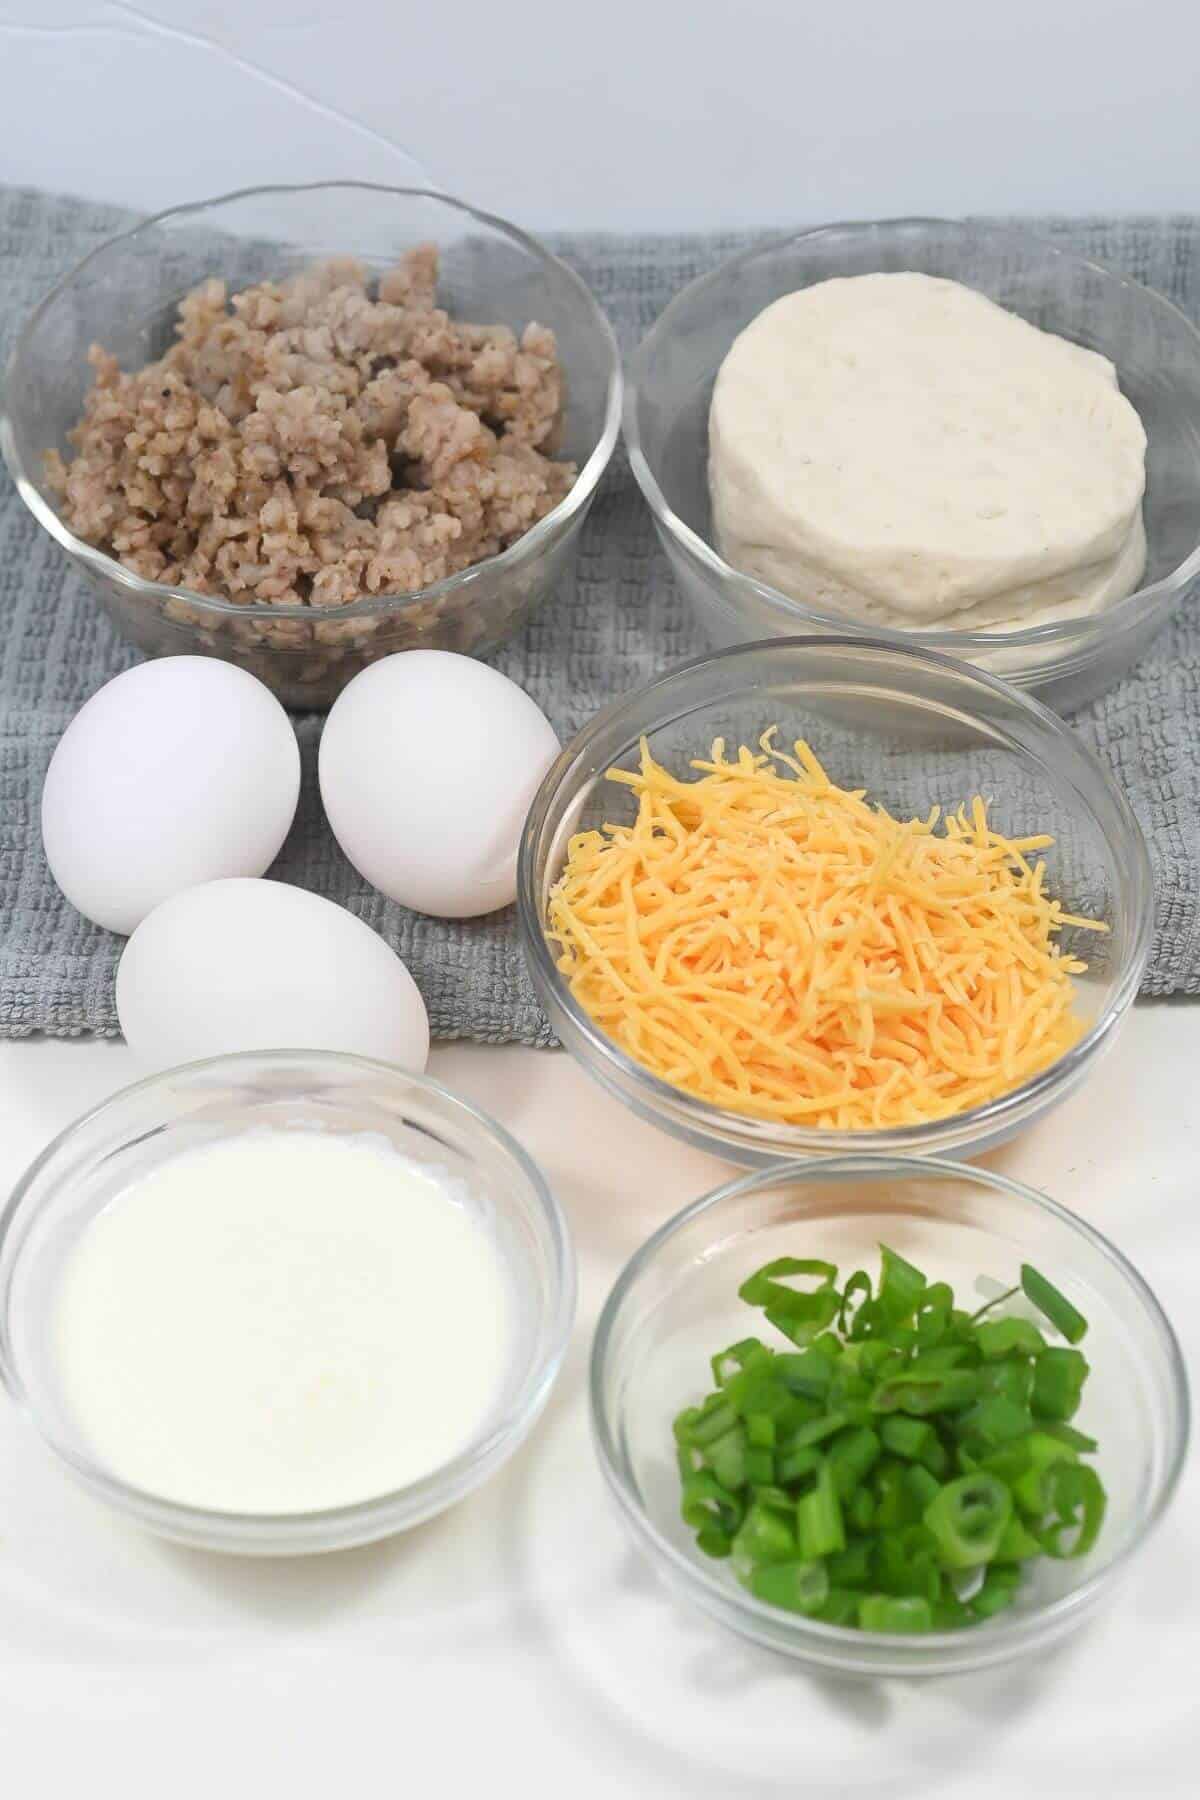 Ingredients for breakfast casserole laid out on a table, including ground meat, eggs, shredded cheese, chopped green onions, and cream.